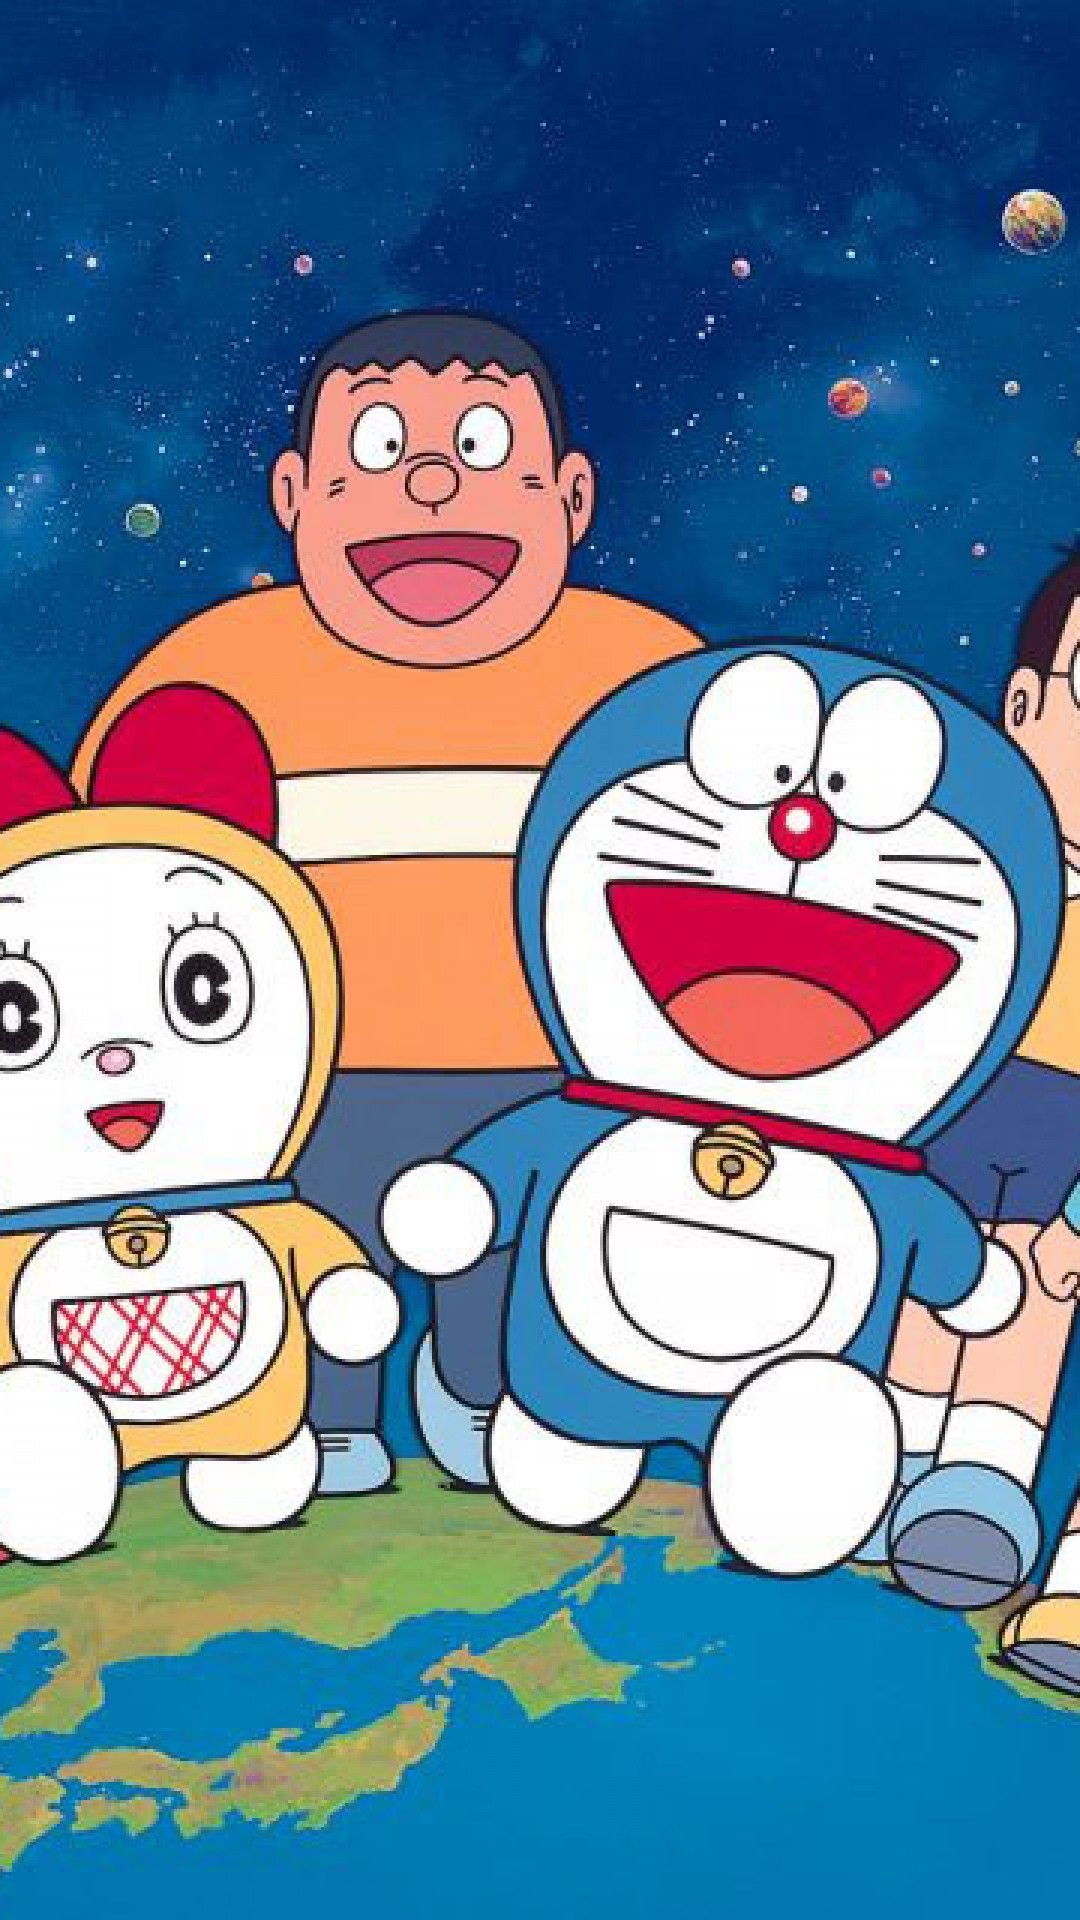 Posterfry Doraemon Anime Poster for Home Office and Student Room Wall |  Aesthetic Poster | Wall Decor DORMN02 (18X12 inch) : Amazon.in: Home &  Kitchen